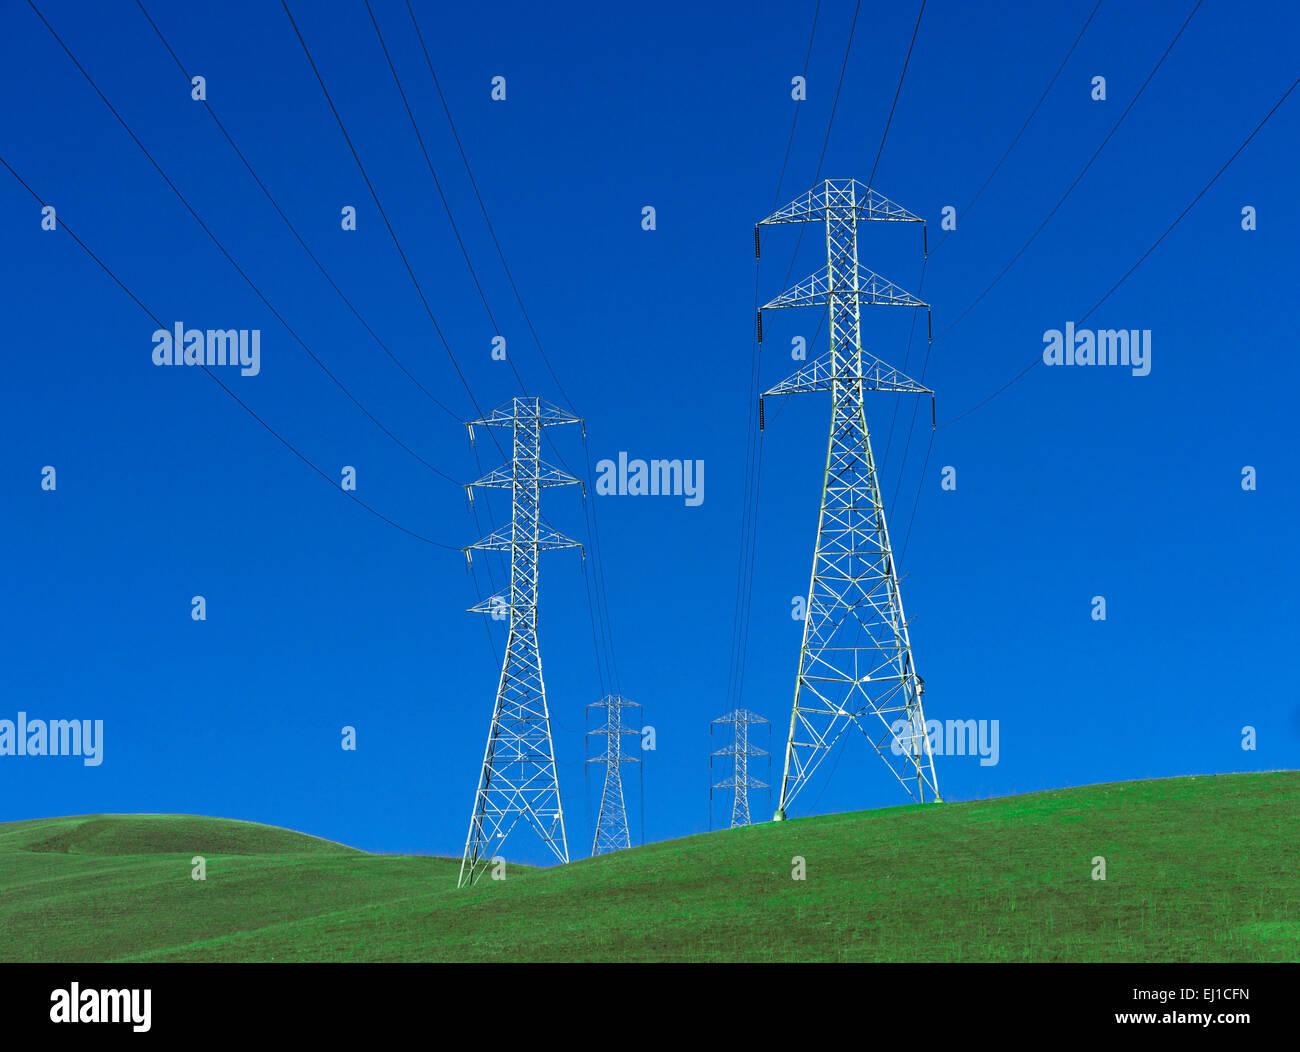 Electricity pylons standing on undulating green grass with deep blue sky Stock Photo